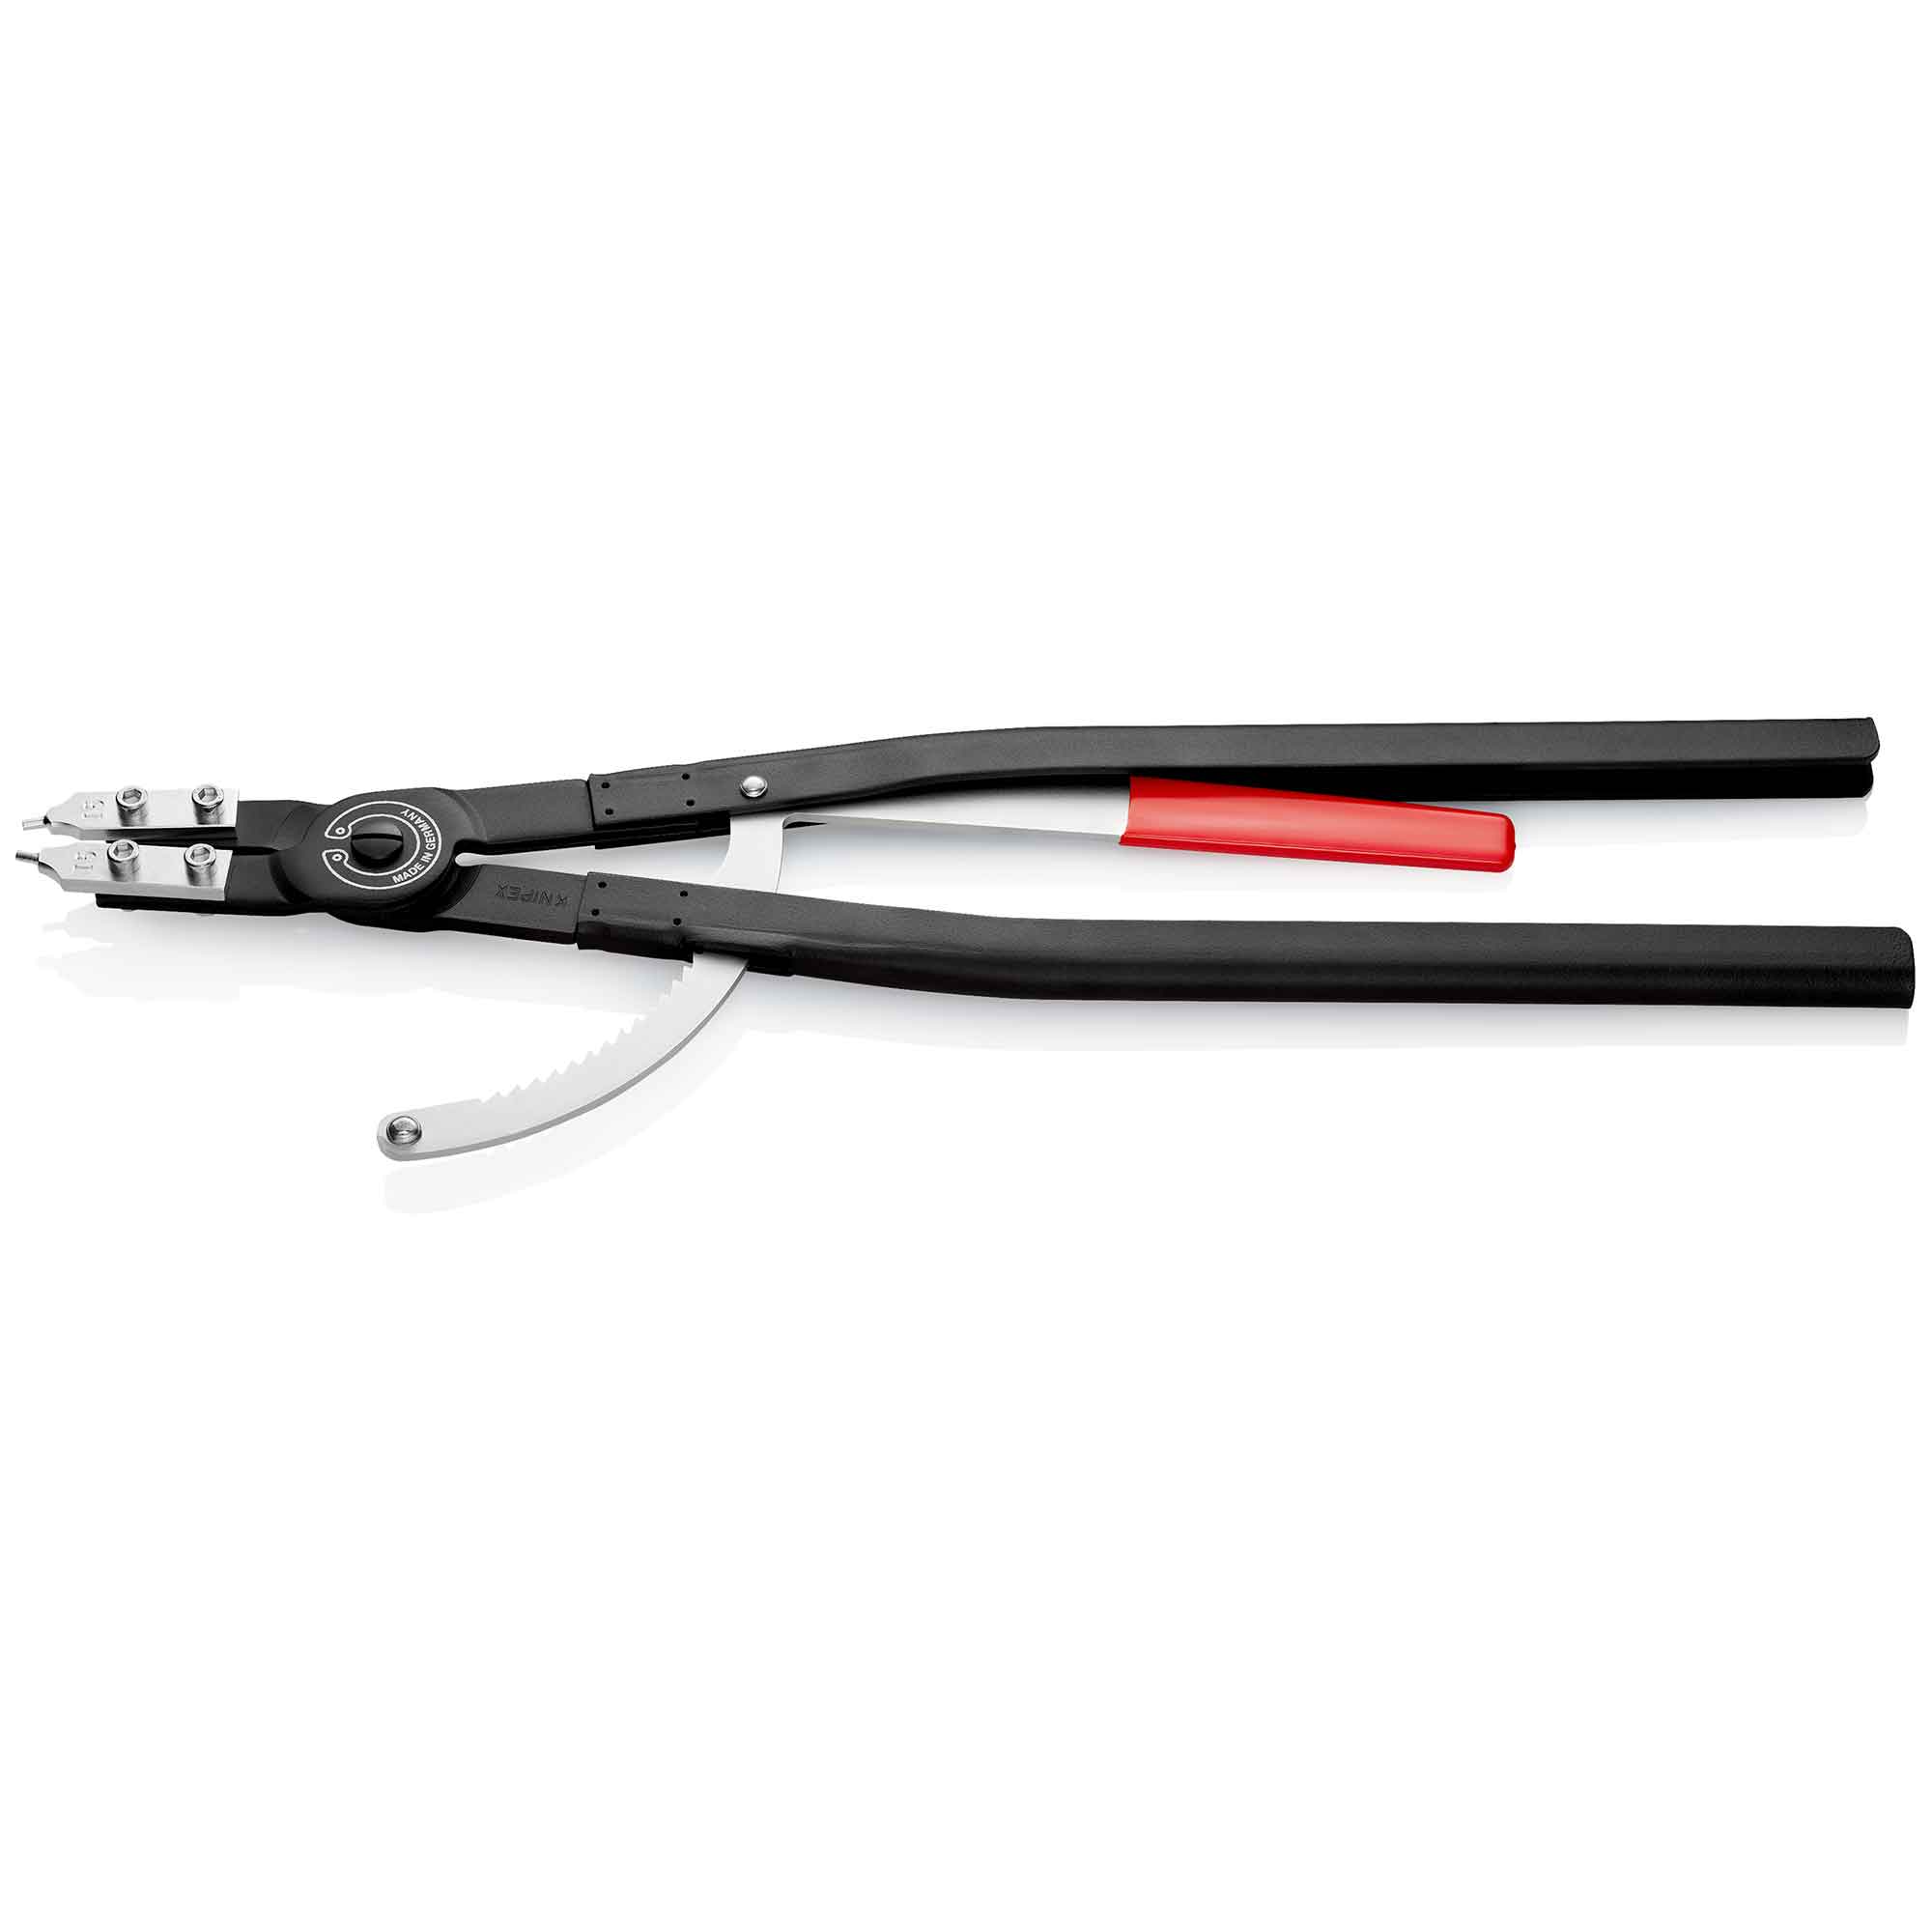 Circlip Pliers | Knipex | Tools by Brand | Jens Putzier Tools